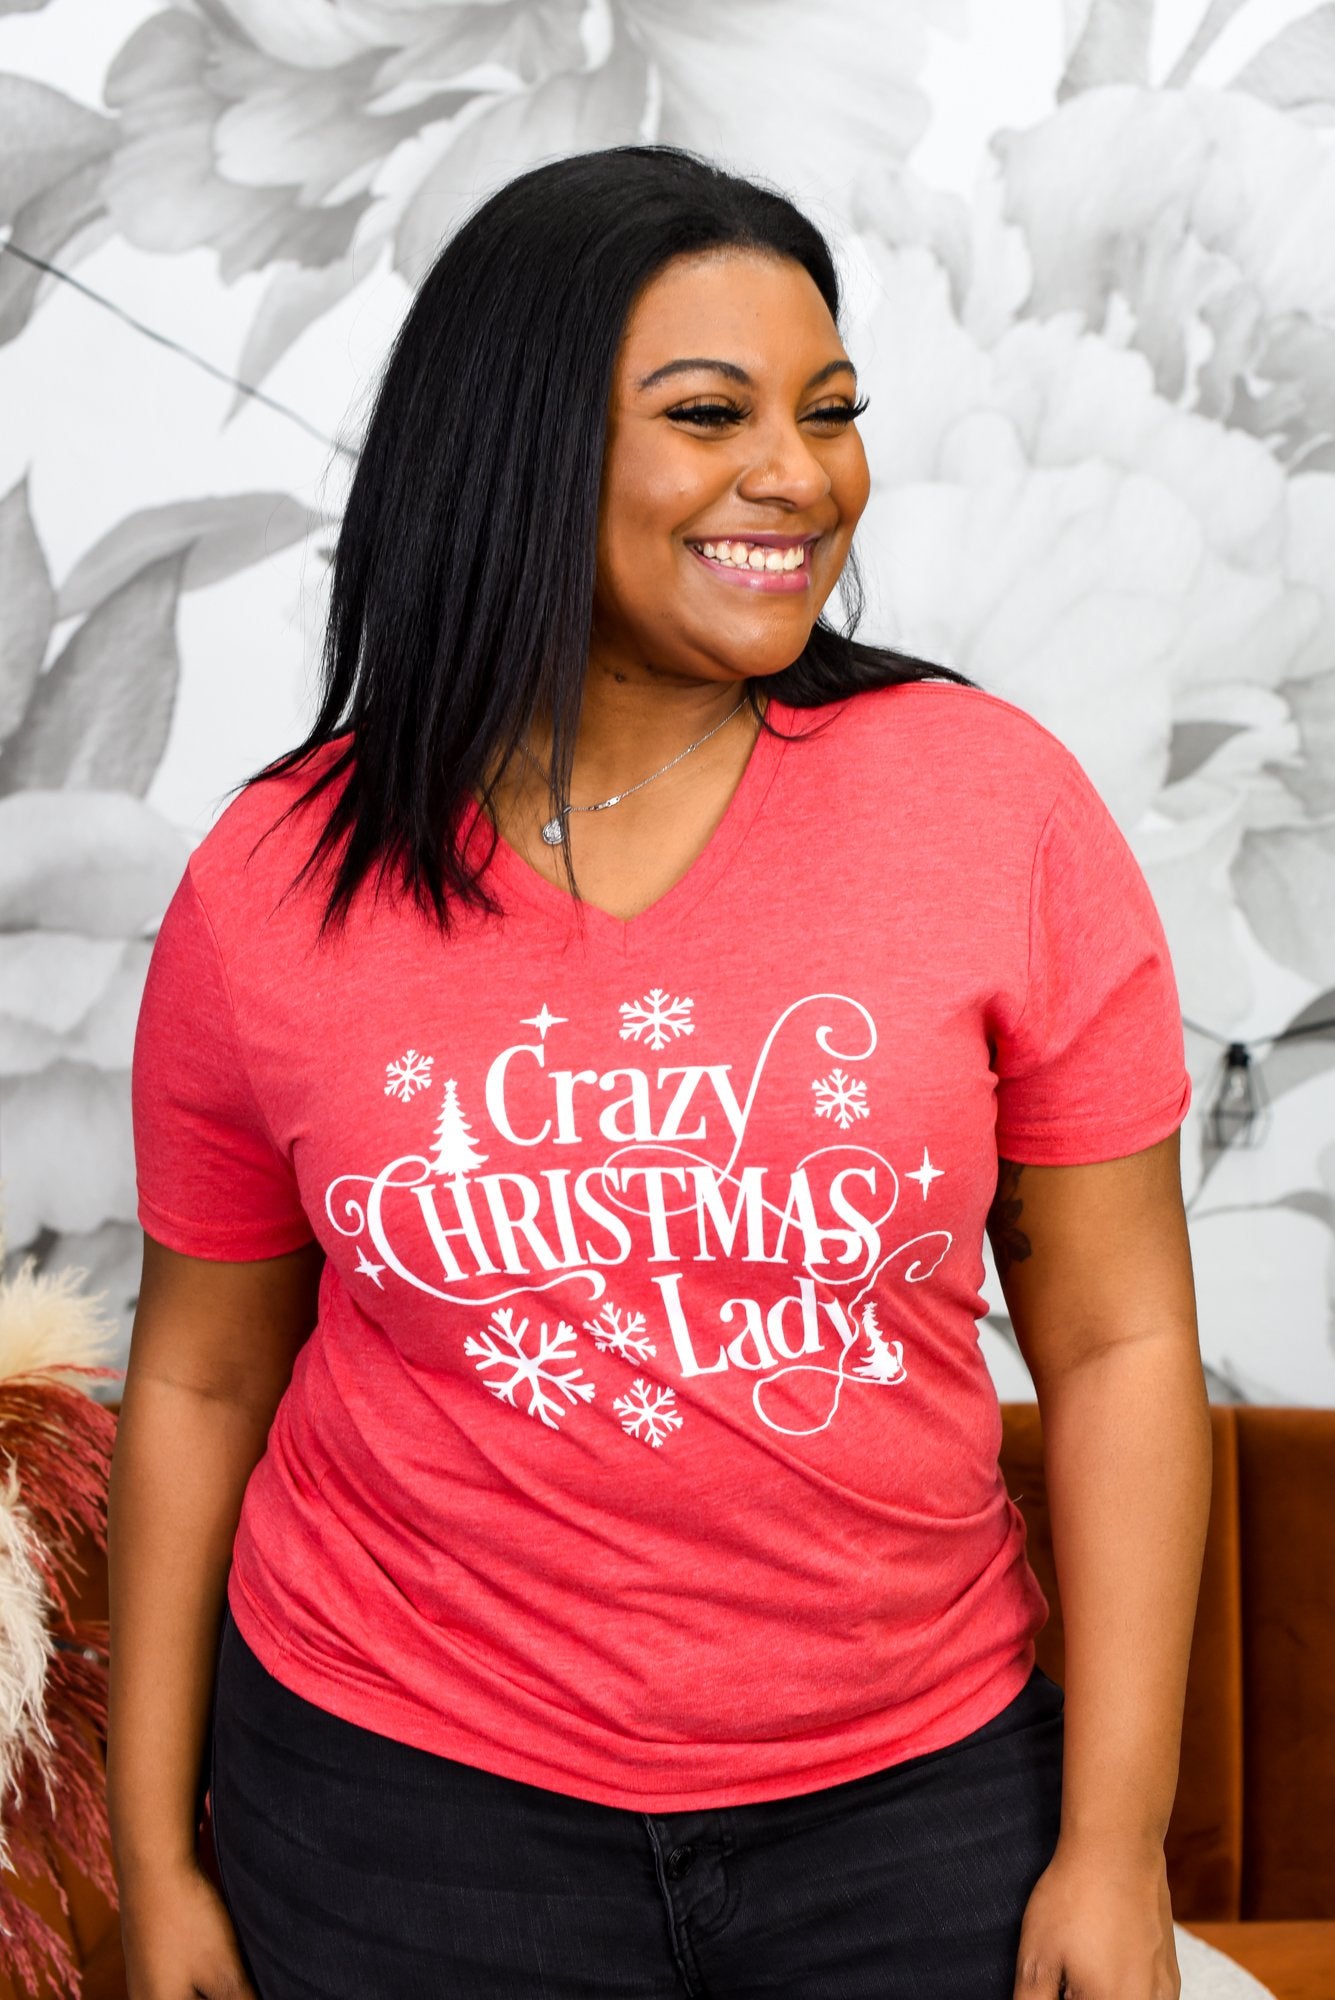 Crazy Christmas Lady Vintage Red V Neck Graphic Tee - A1746VRD